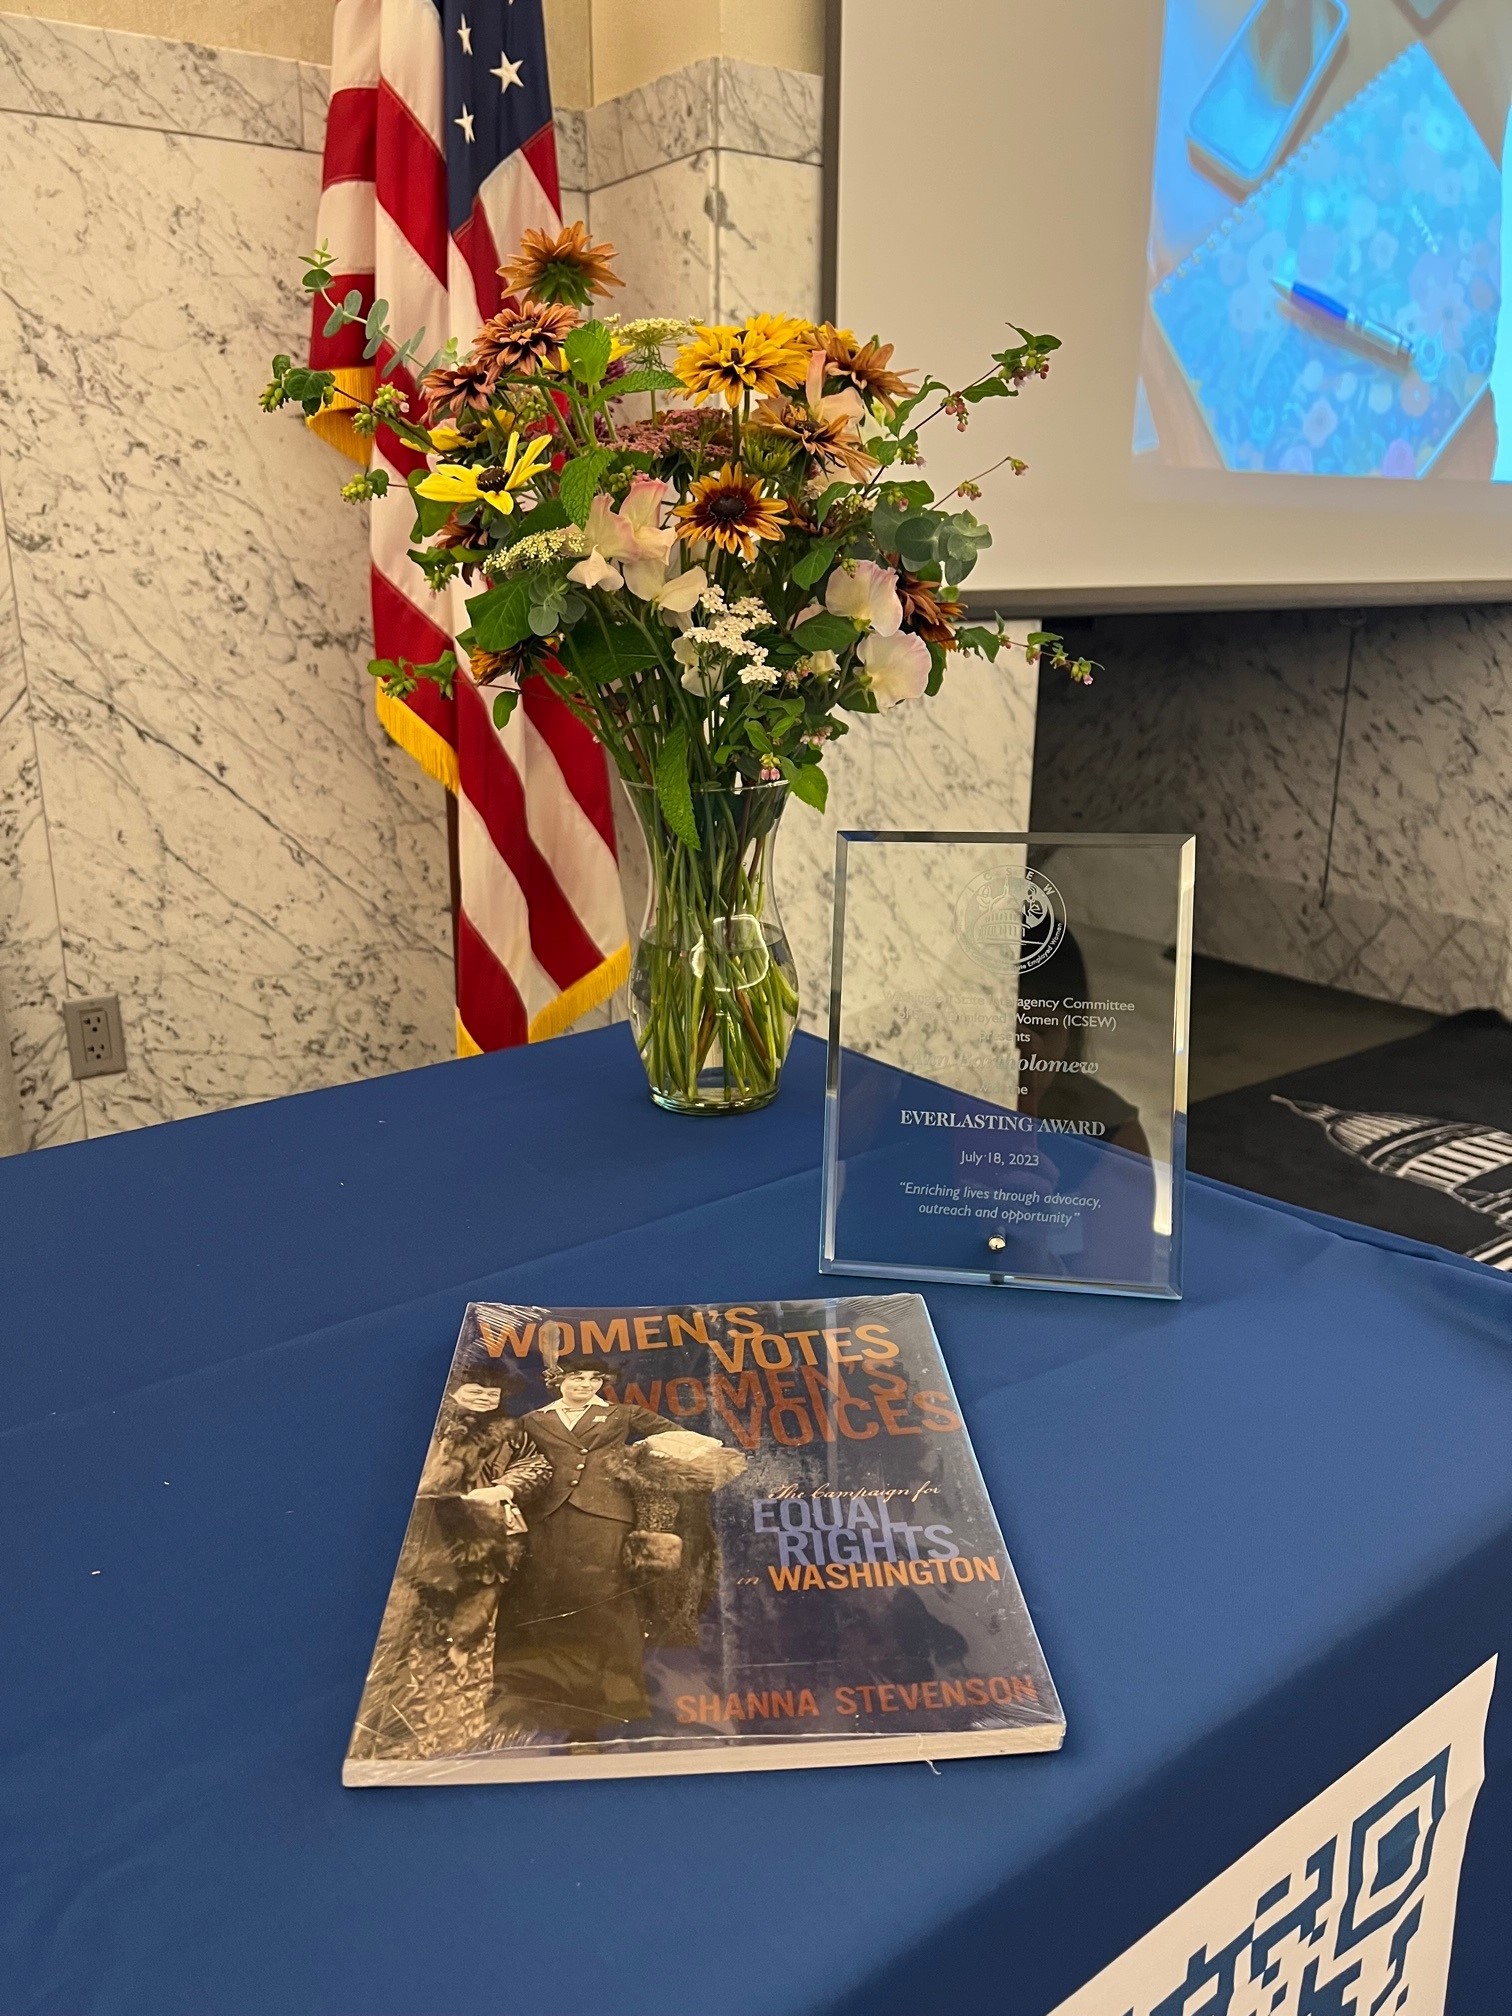 image of ICSEW award on table next to flower vase and book on women's history